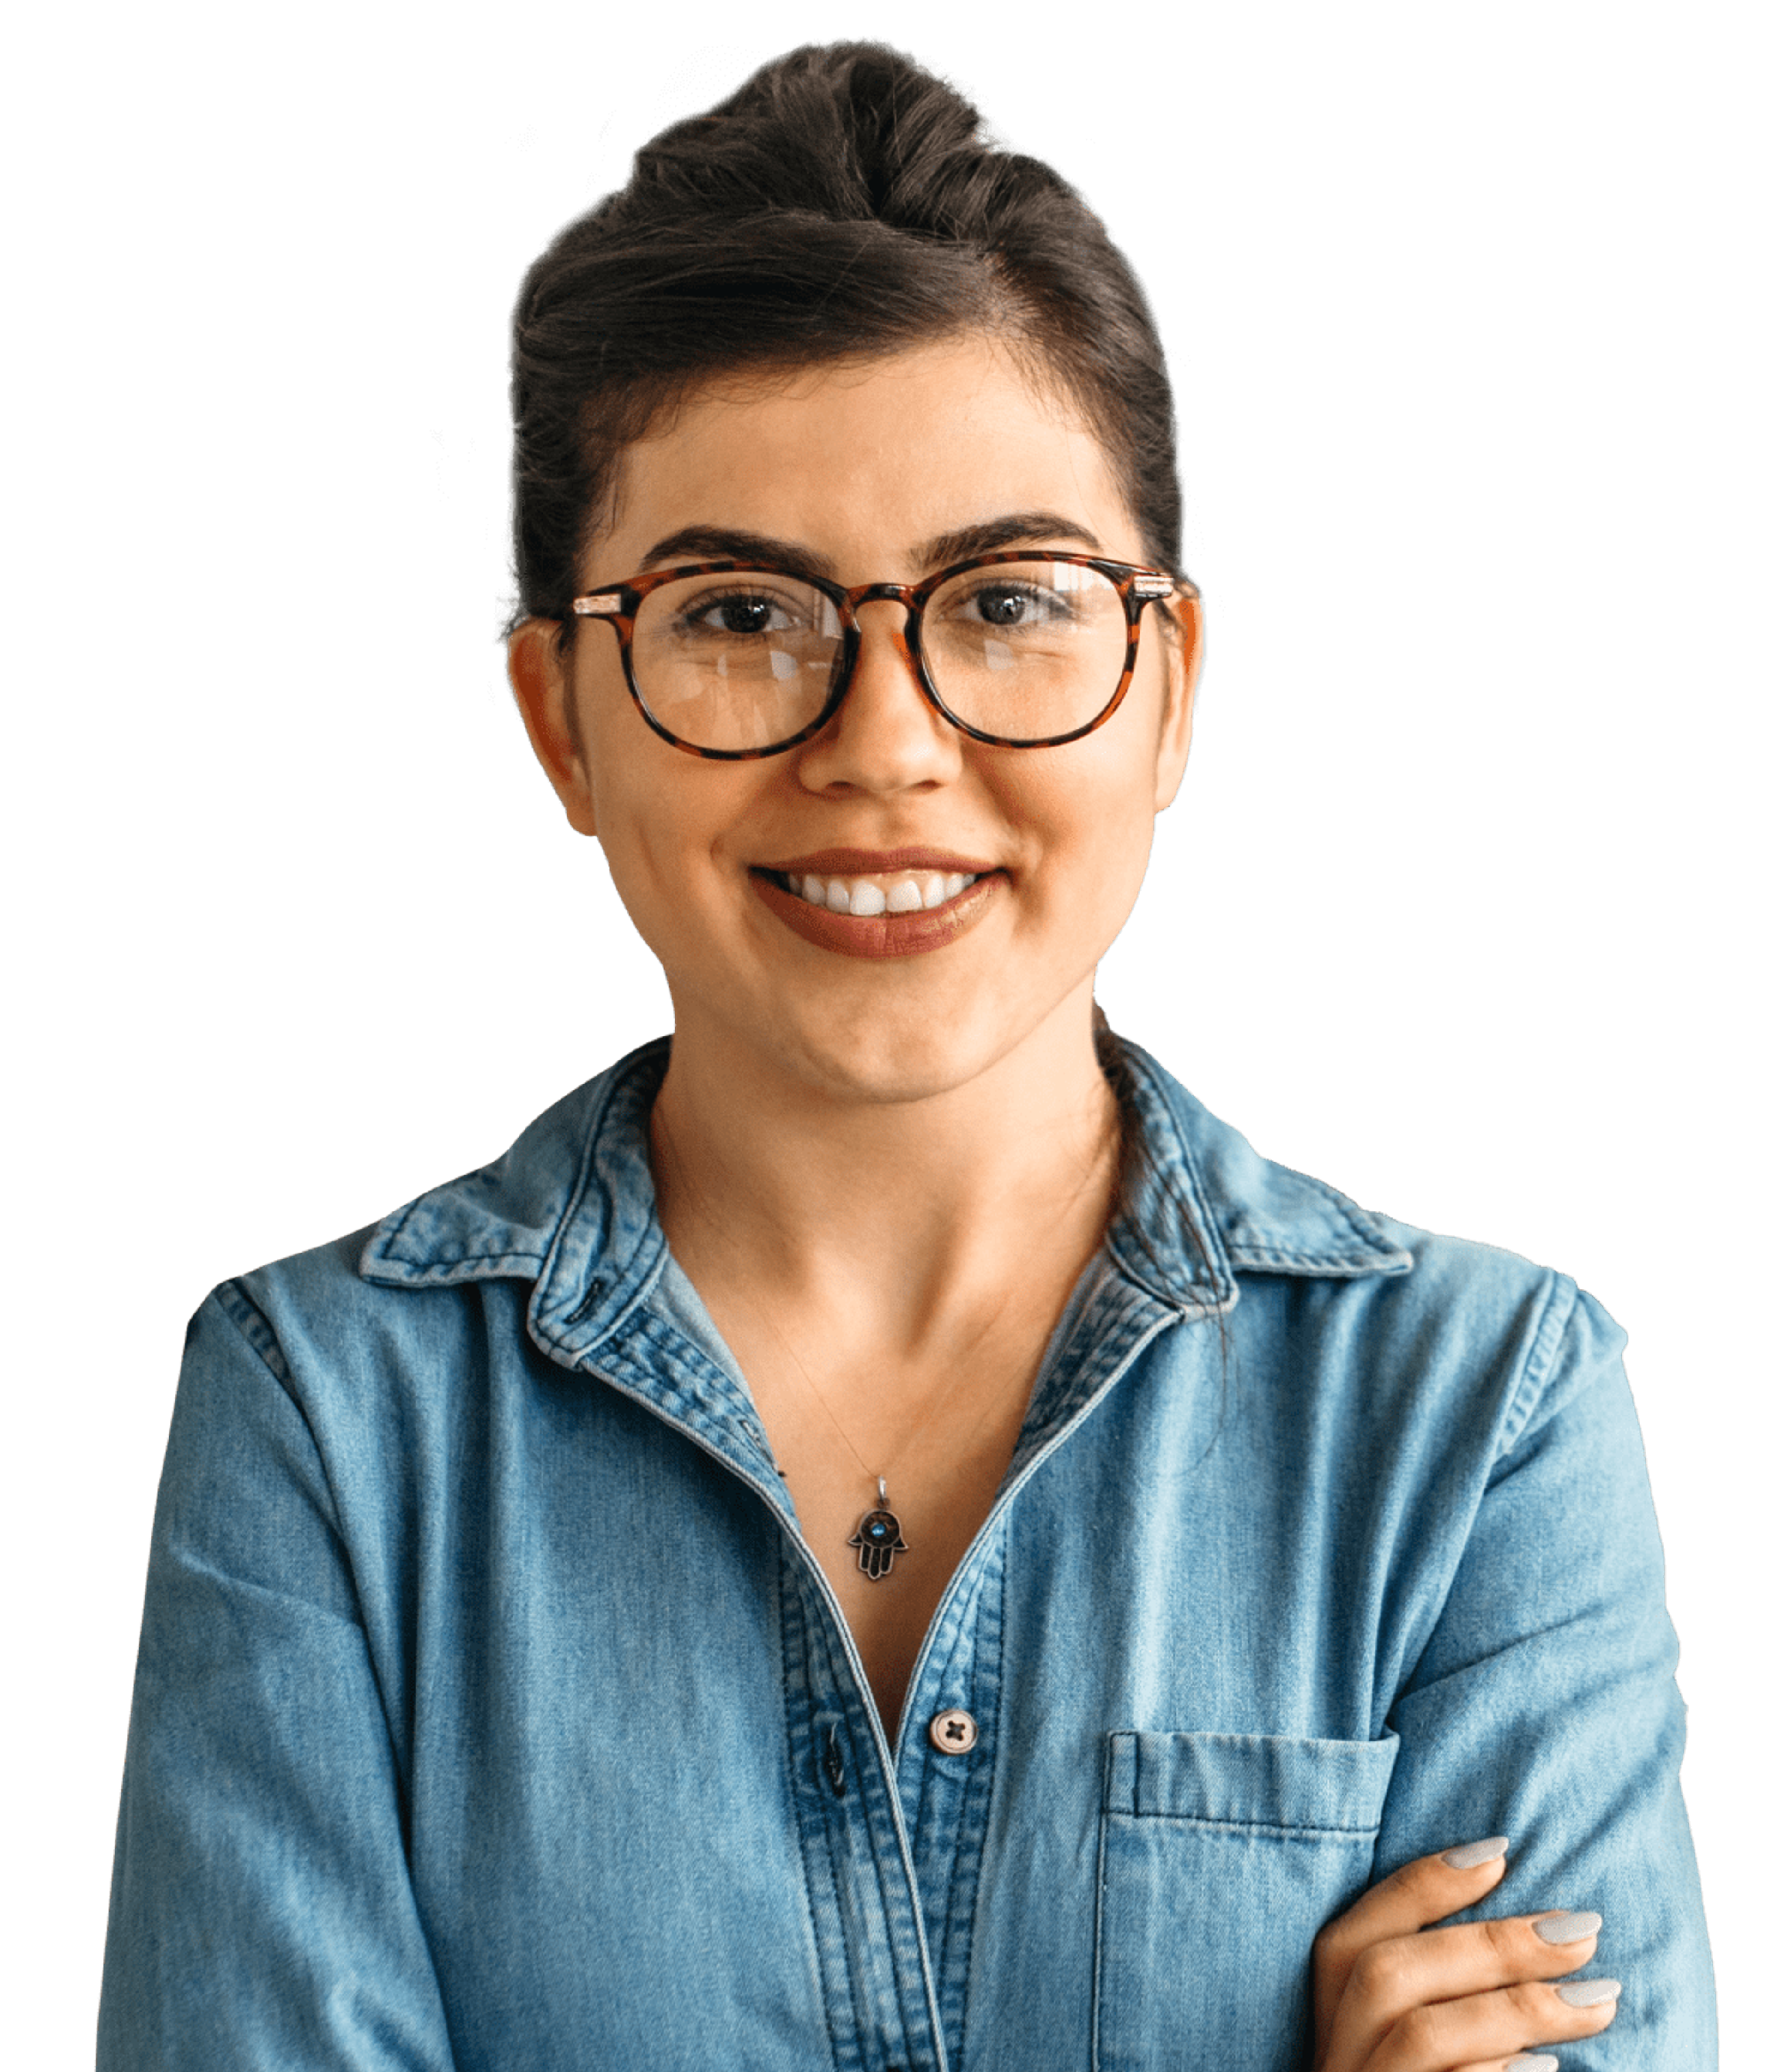 Woman wearing glasses and denim shirt. Arms folded, smiling at camera.